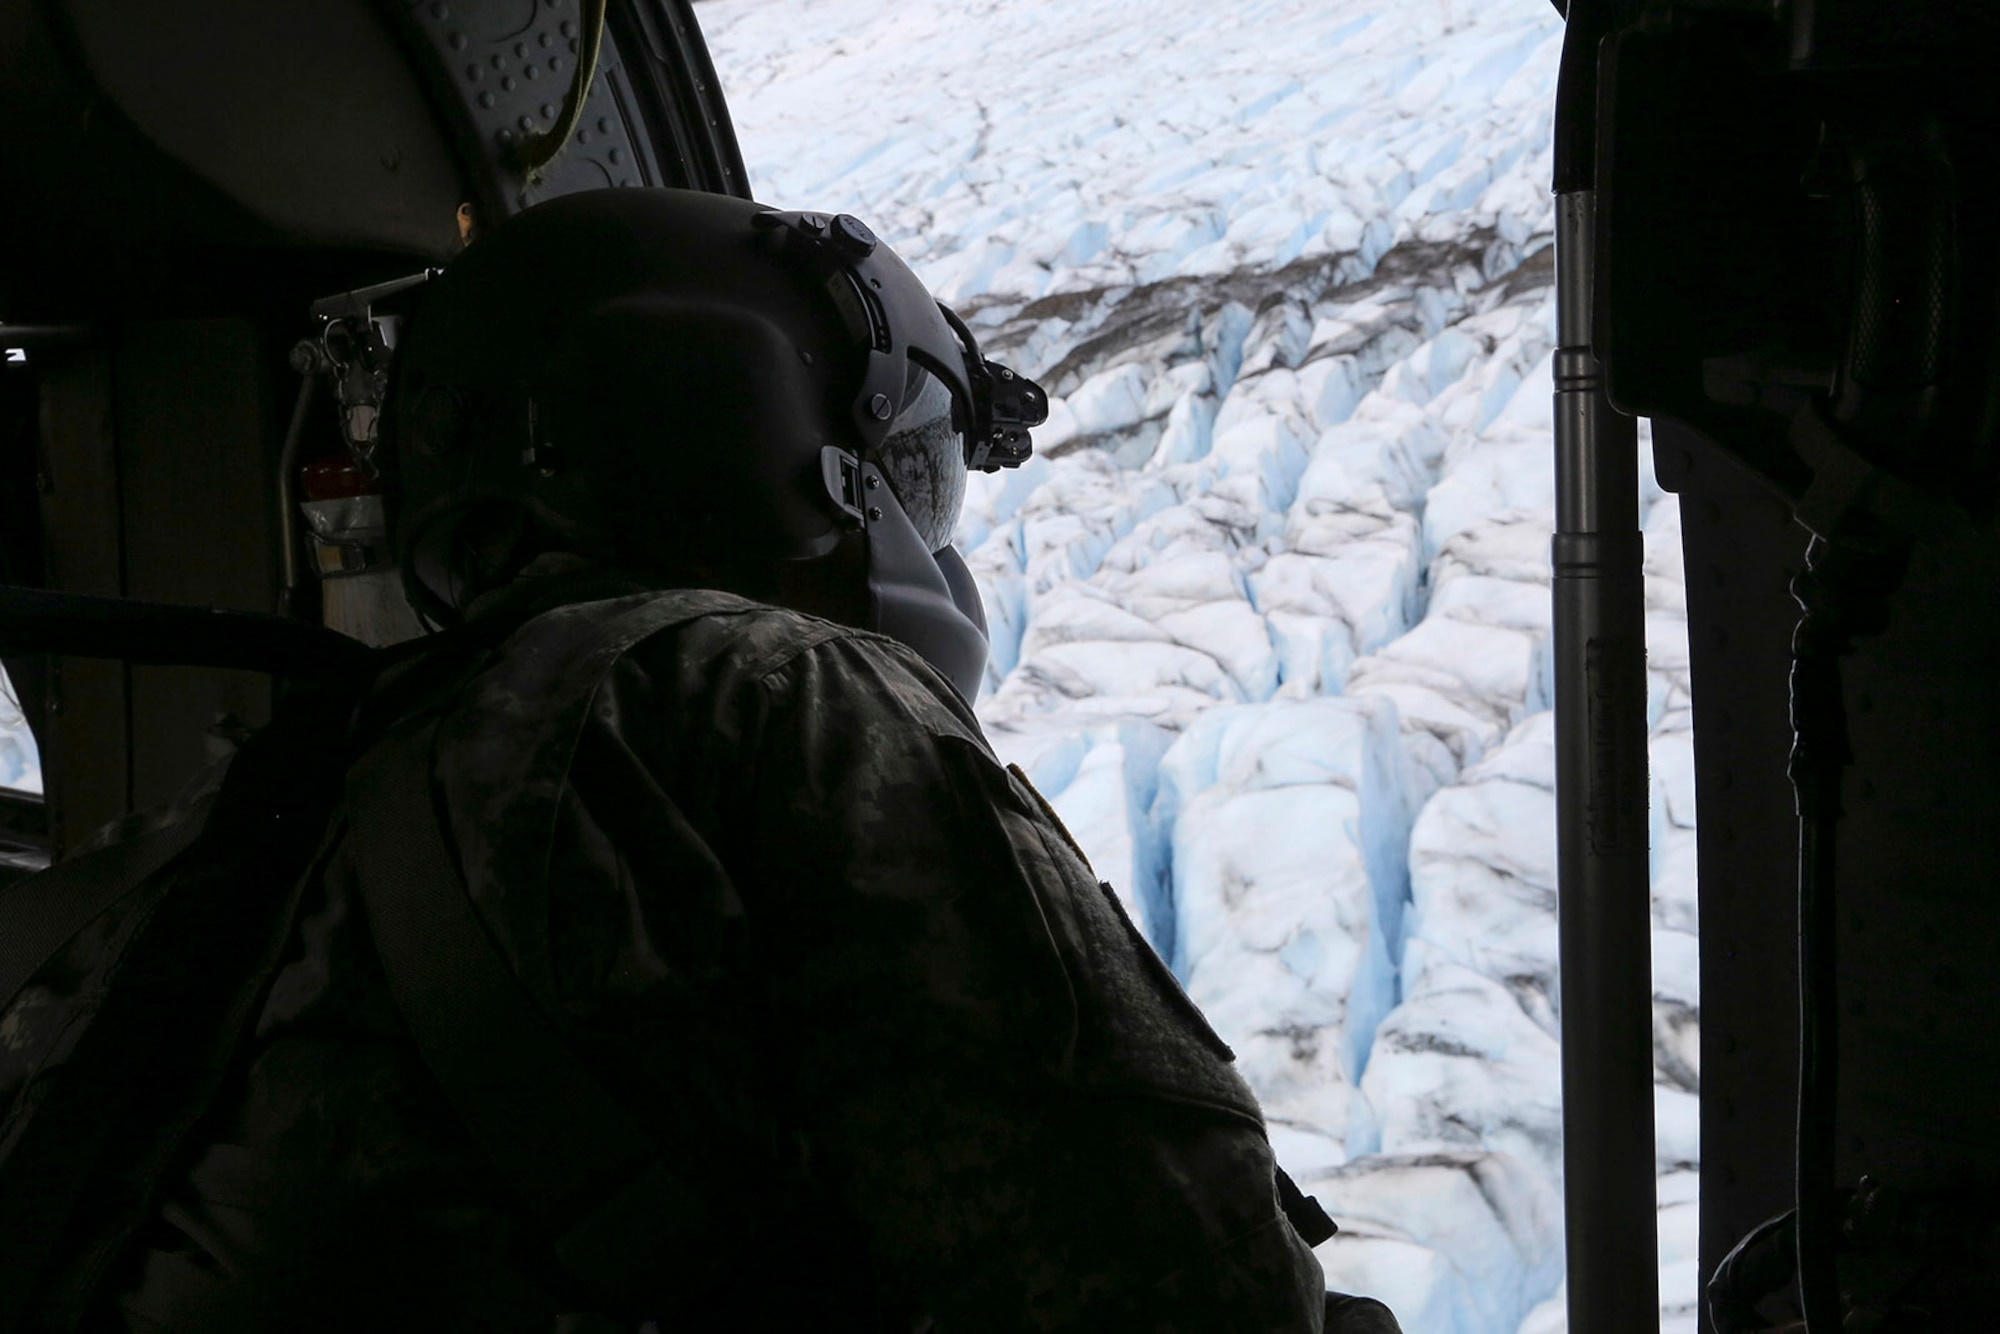 Alaska Army National Guard UH-60 Black Hawk helicopter crew chief, Sgt. Sonny Cooper, assigned to the 1st Battalion, 207th Aviation Regiment, surveys a potential landing site on Colony Glacier, Alaska, June 4, 2016. In November 1952, an Air Force C-124 Globemaster II crashed into nearby Mount Gannett in the Chugach Mountains killing all of the 52 people on board. Every summer since 2012, Alaskan Command and Alaska National Guard personnel support the joint effort of Operation Colony Glacier, a mission to recover human remains and remove debris. (U.S. Air Force photo/Alejandro Pena)  